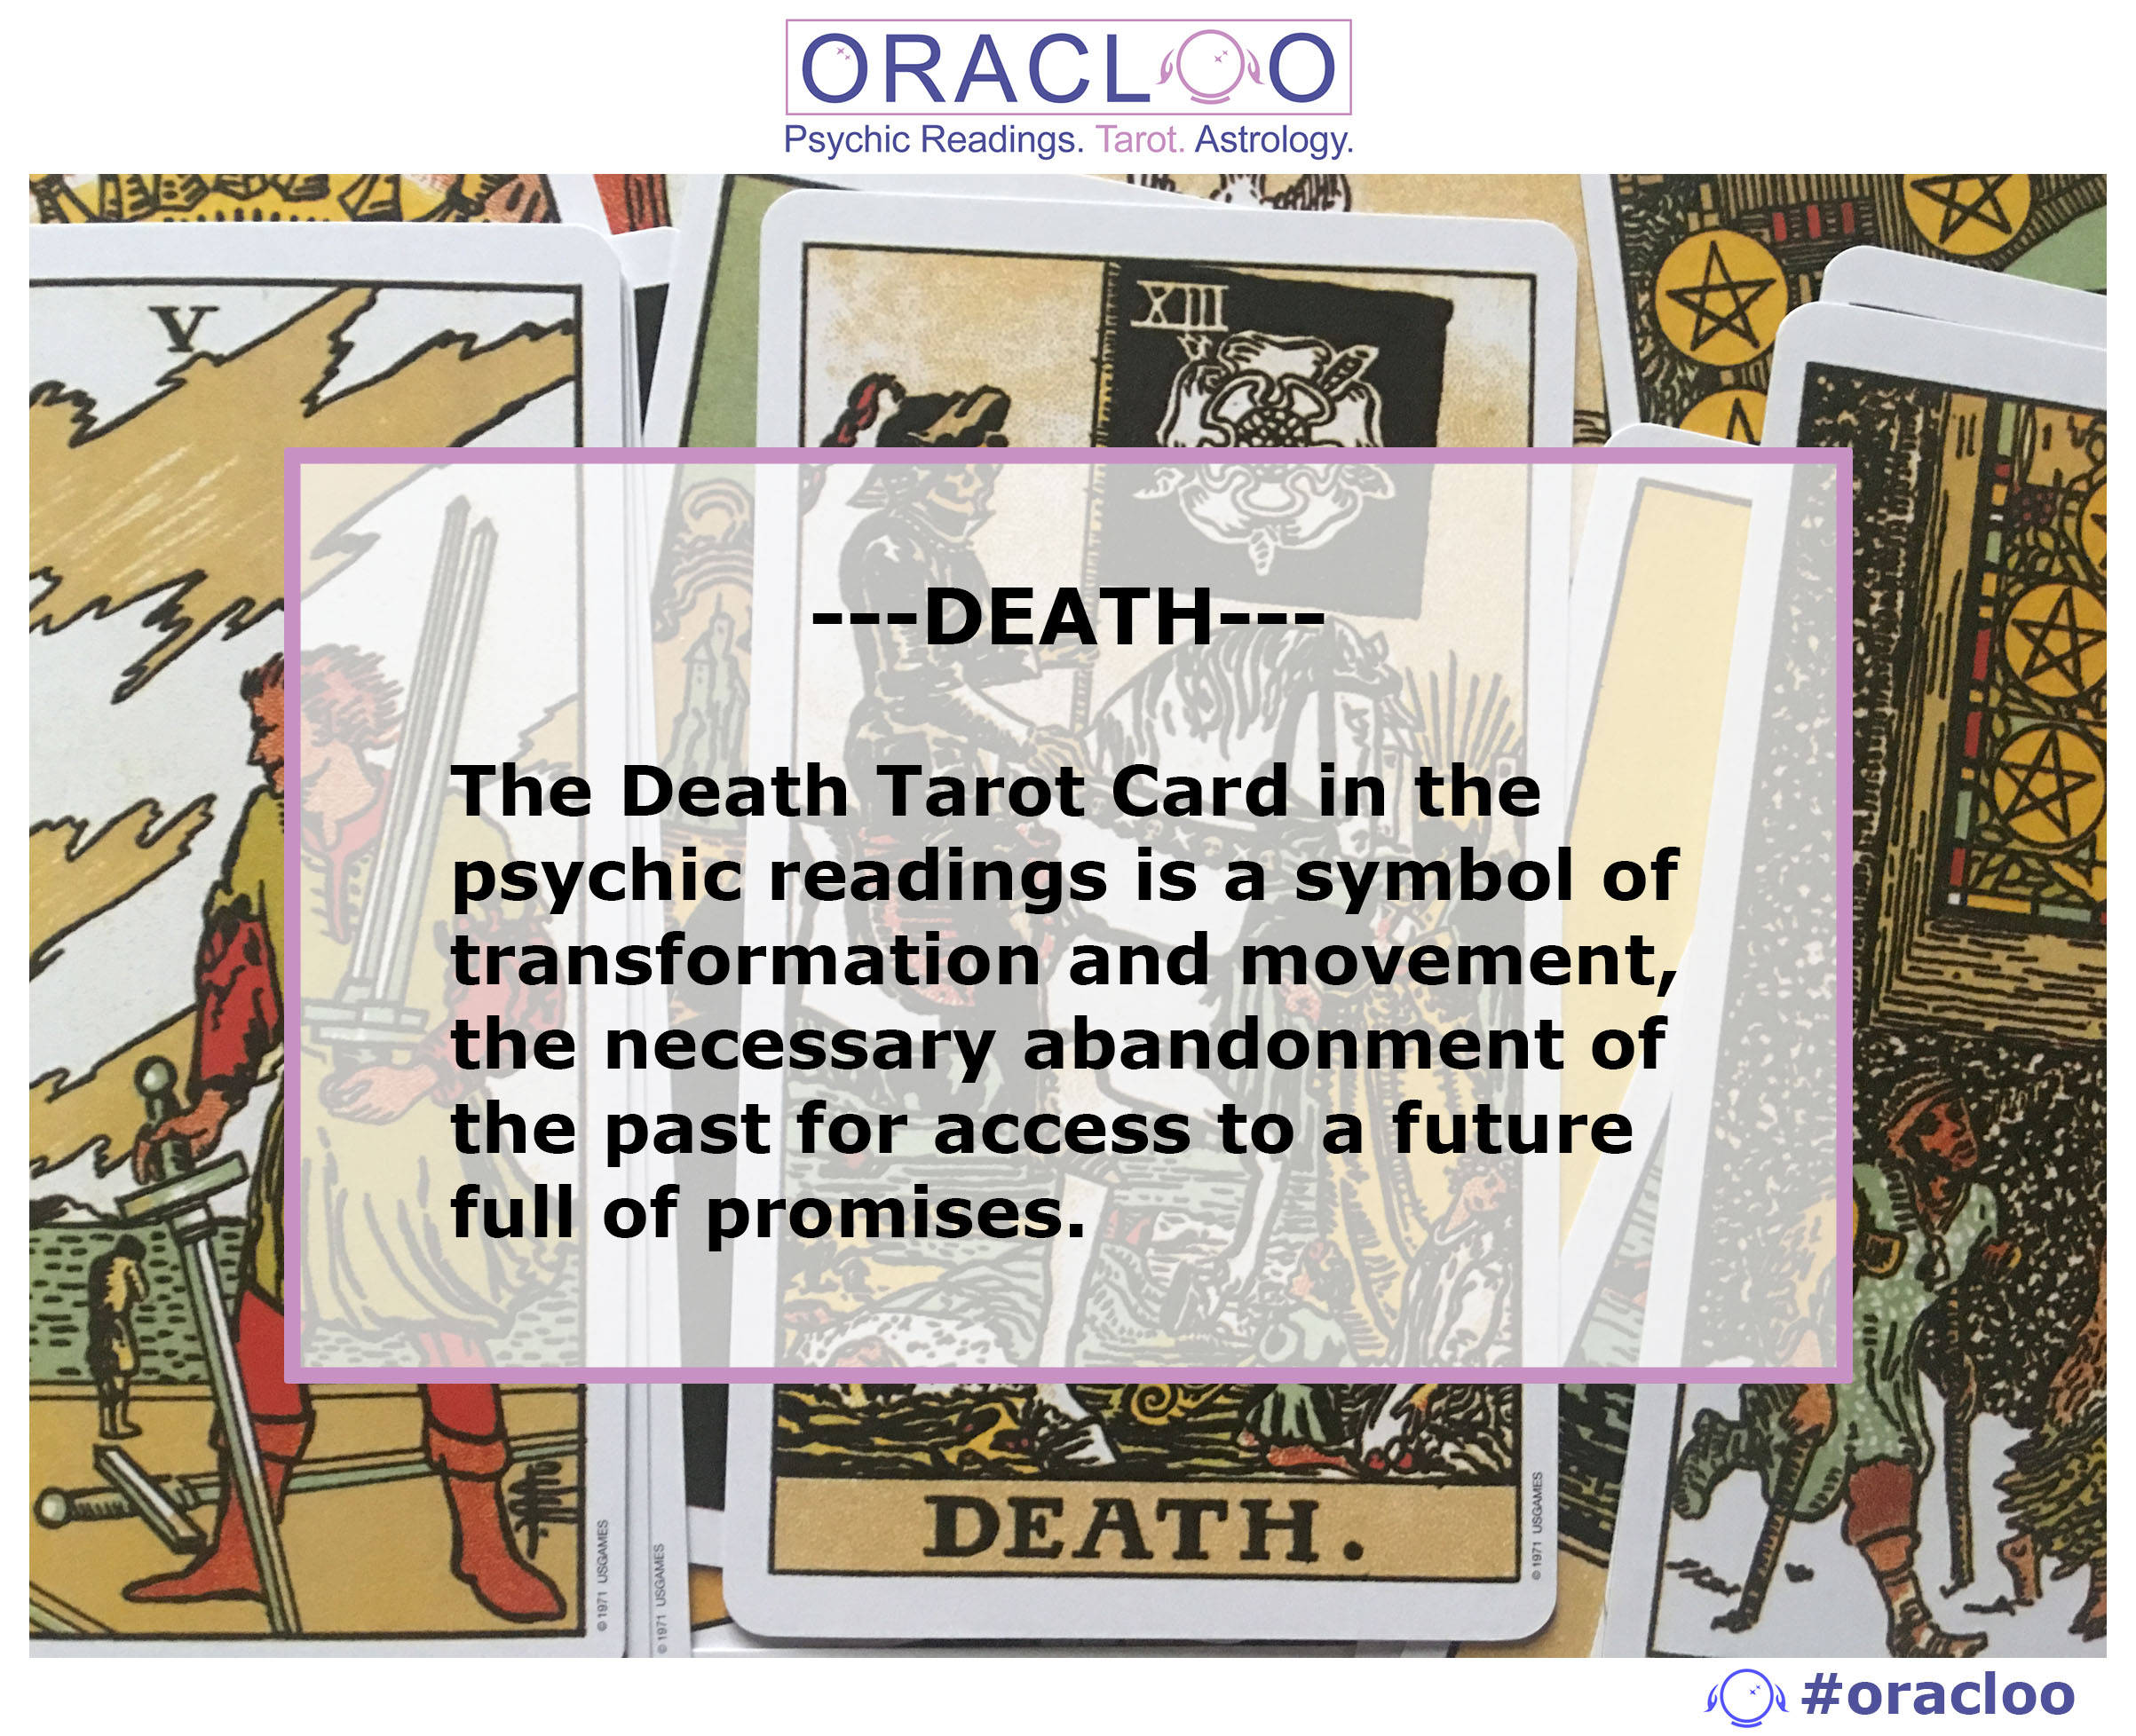 5. The Death Tarot Card and its Connection to Transformation and Change - wide 2